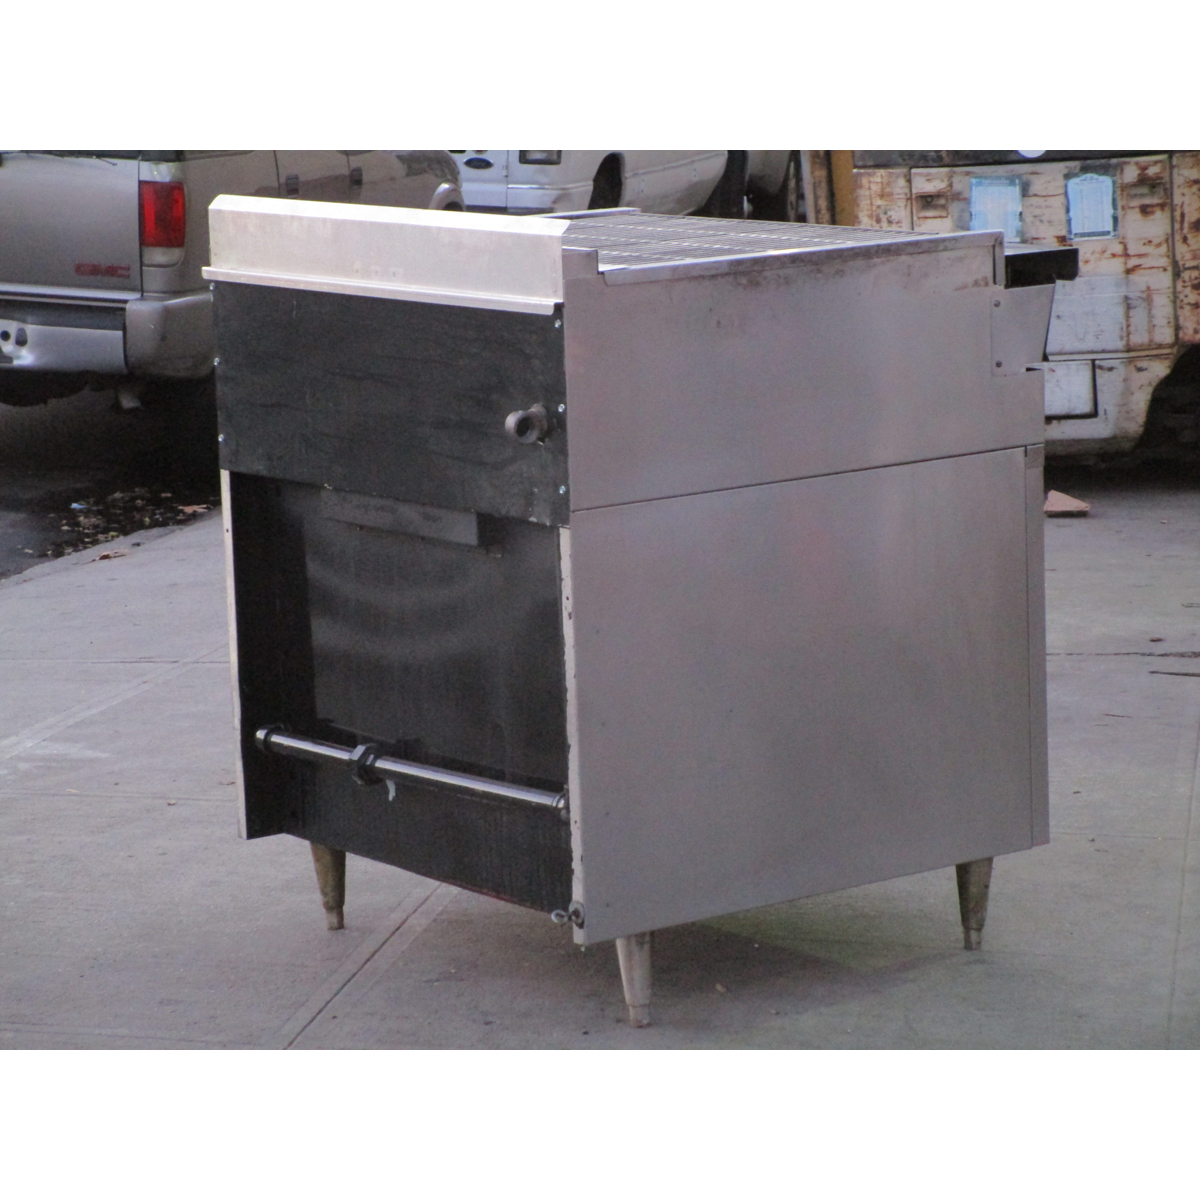 Montague 136XLB/UFLC-36R Oven & Charbroiler Grill, Used Very Good Condition image 1